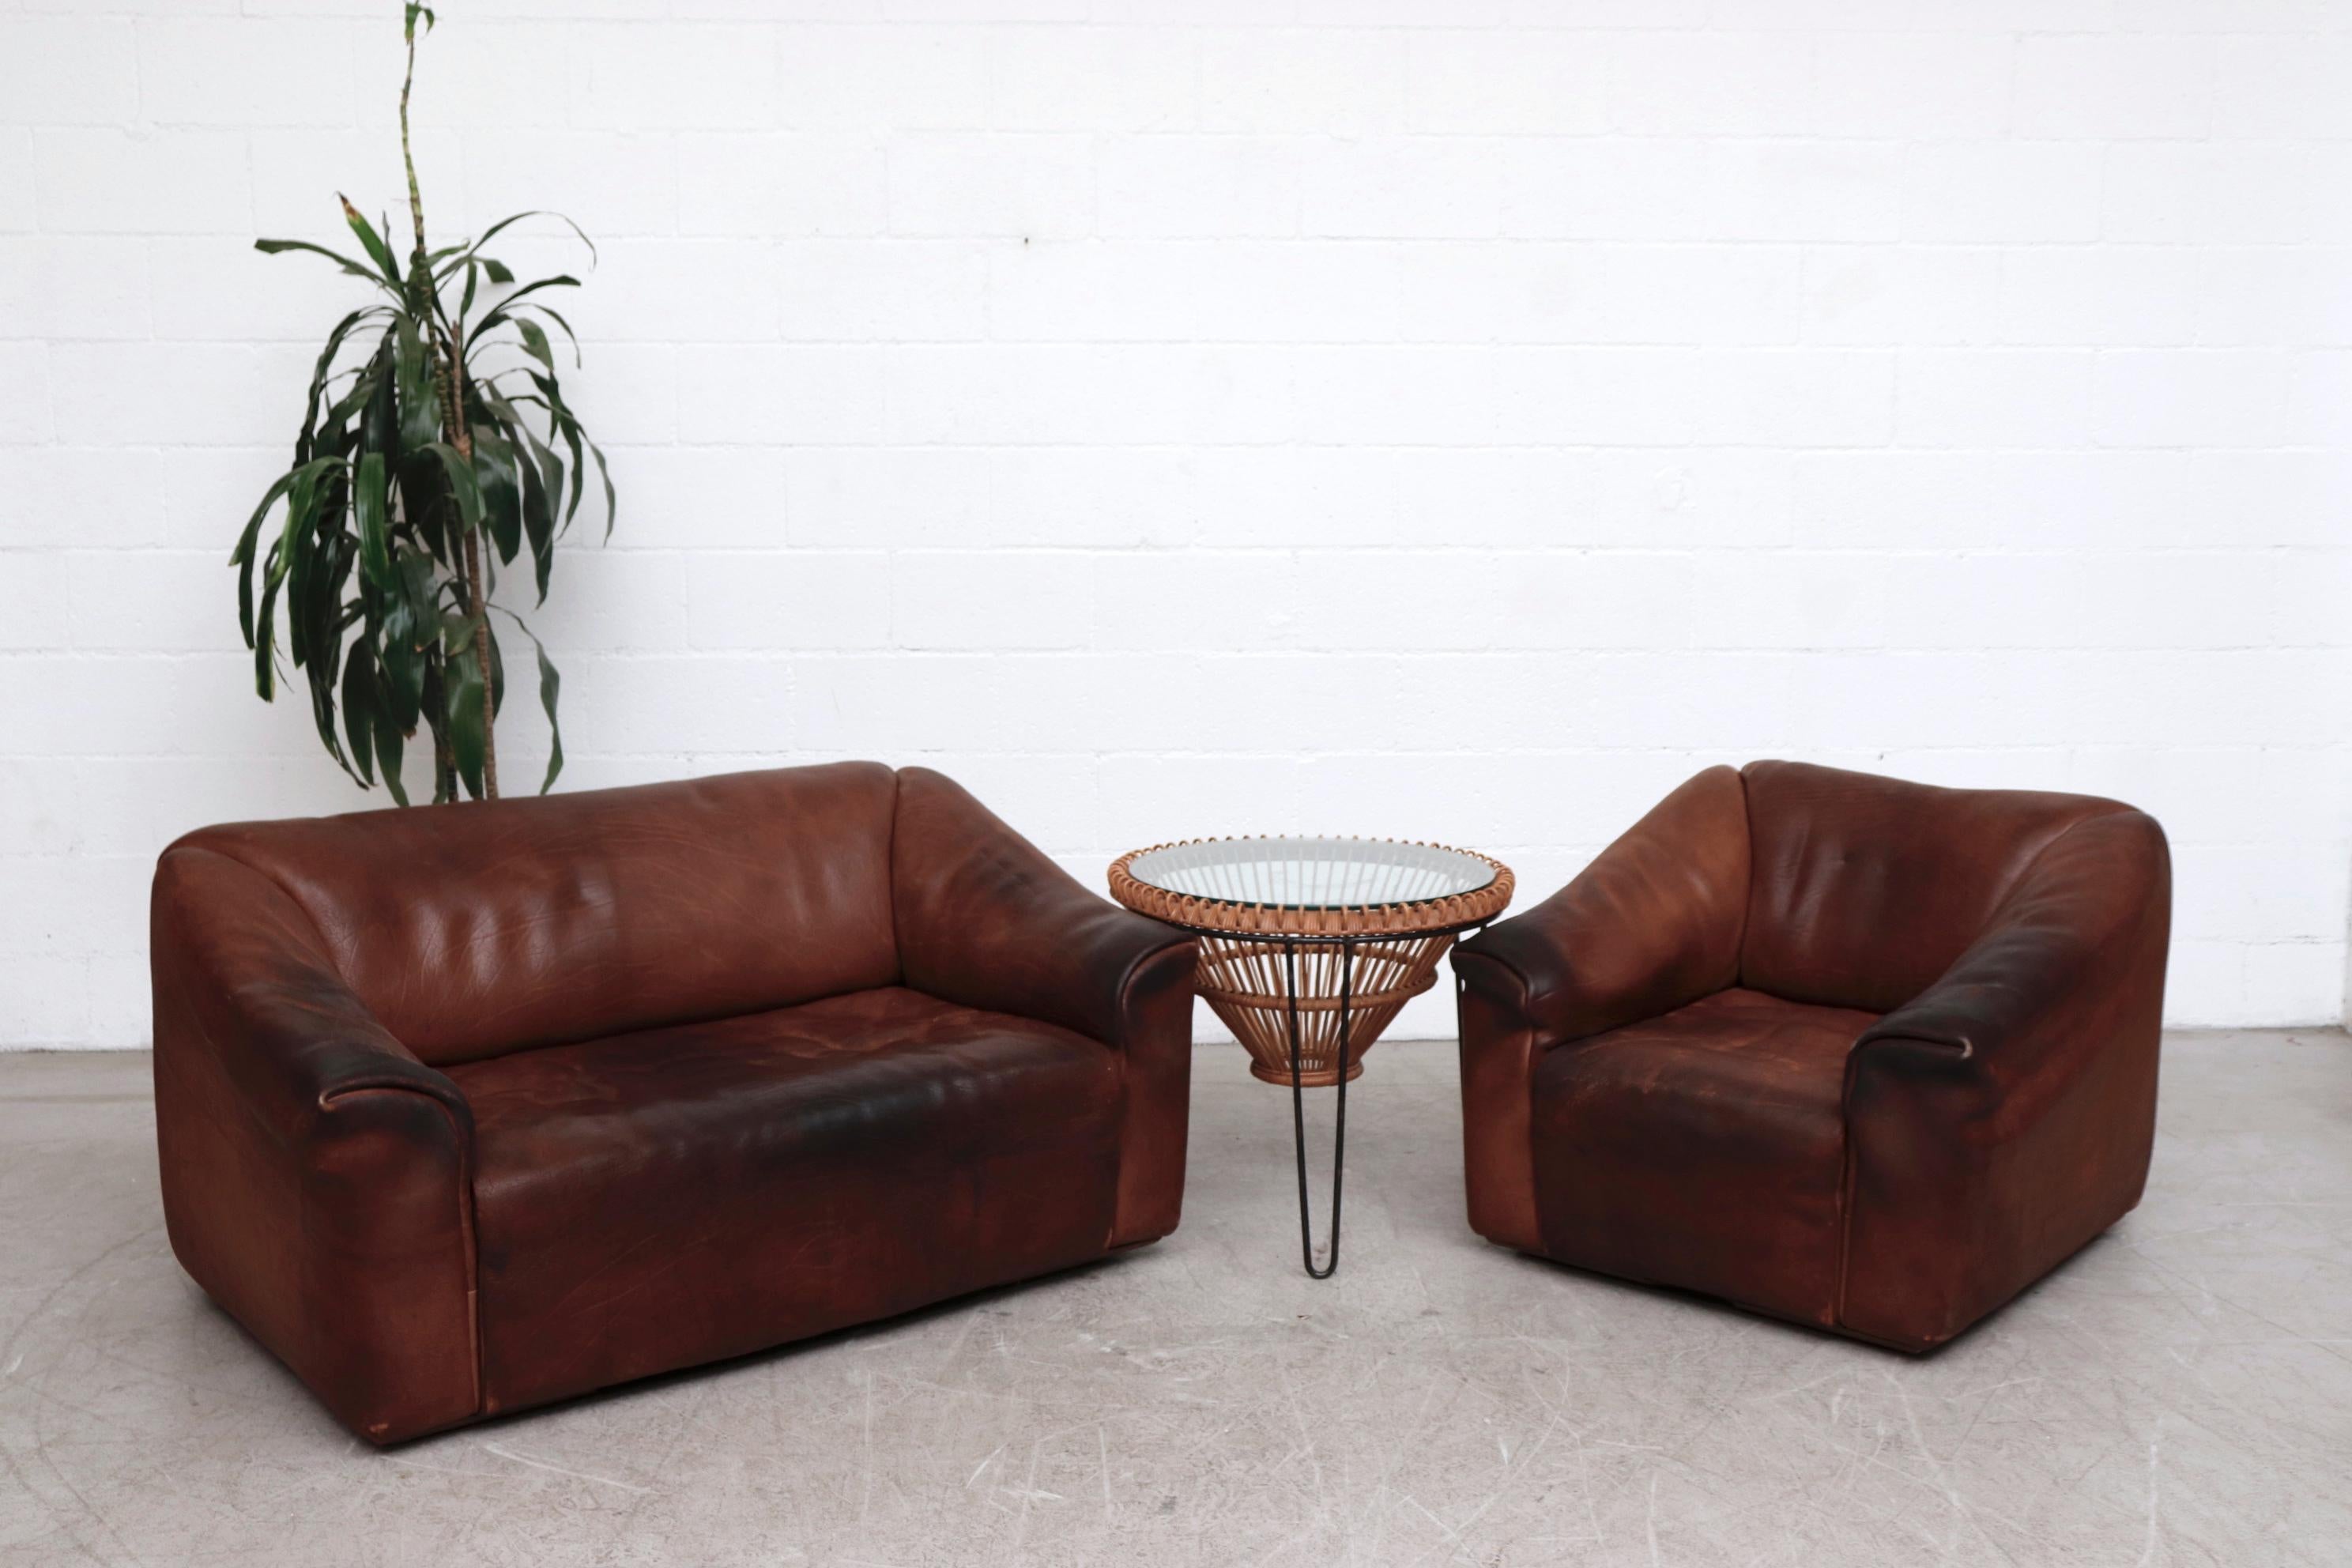 Midcentury De Sede DS47 love seat in thick buffalo leather with pullout / pull-out seat. Stunning heavy patina. In very original condition with visible wear including cracking and scratching consistent with age and use. Matching De Sede DS47 Lounge